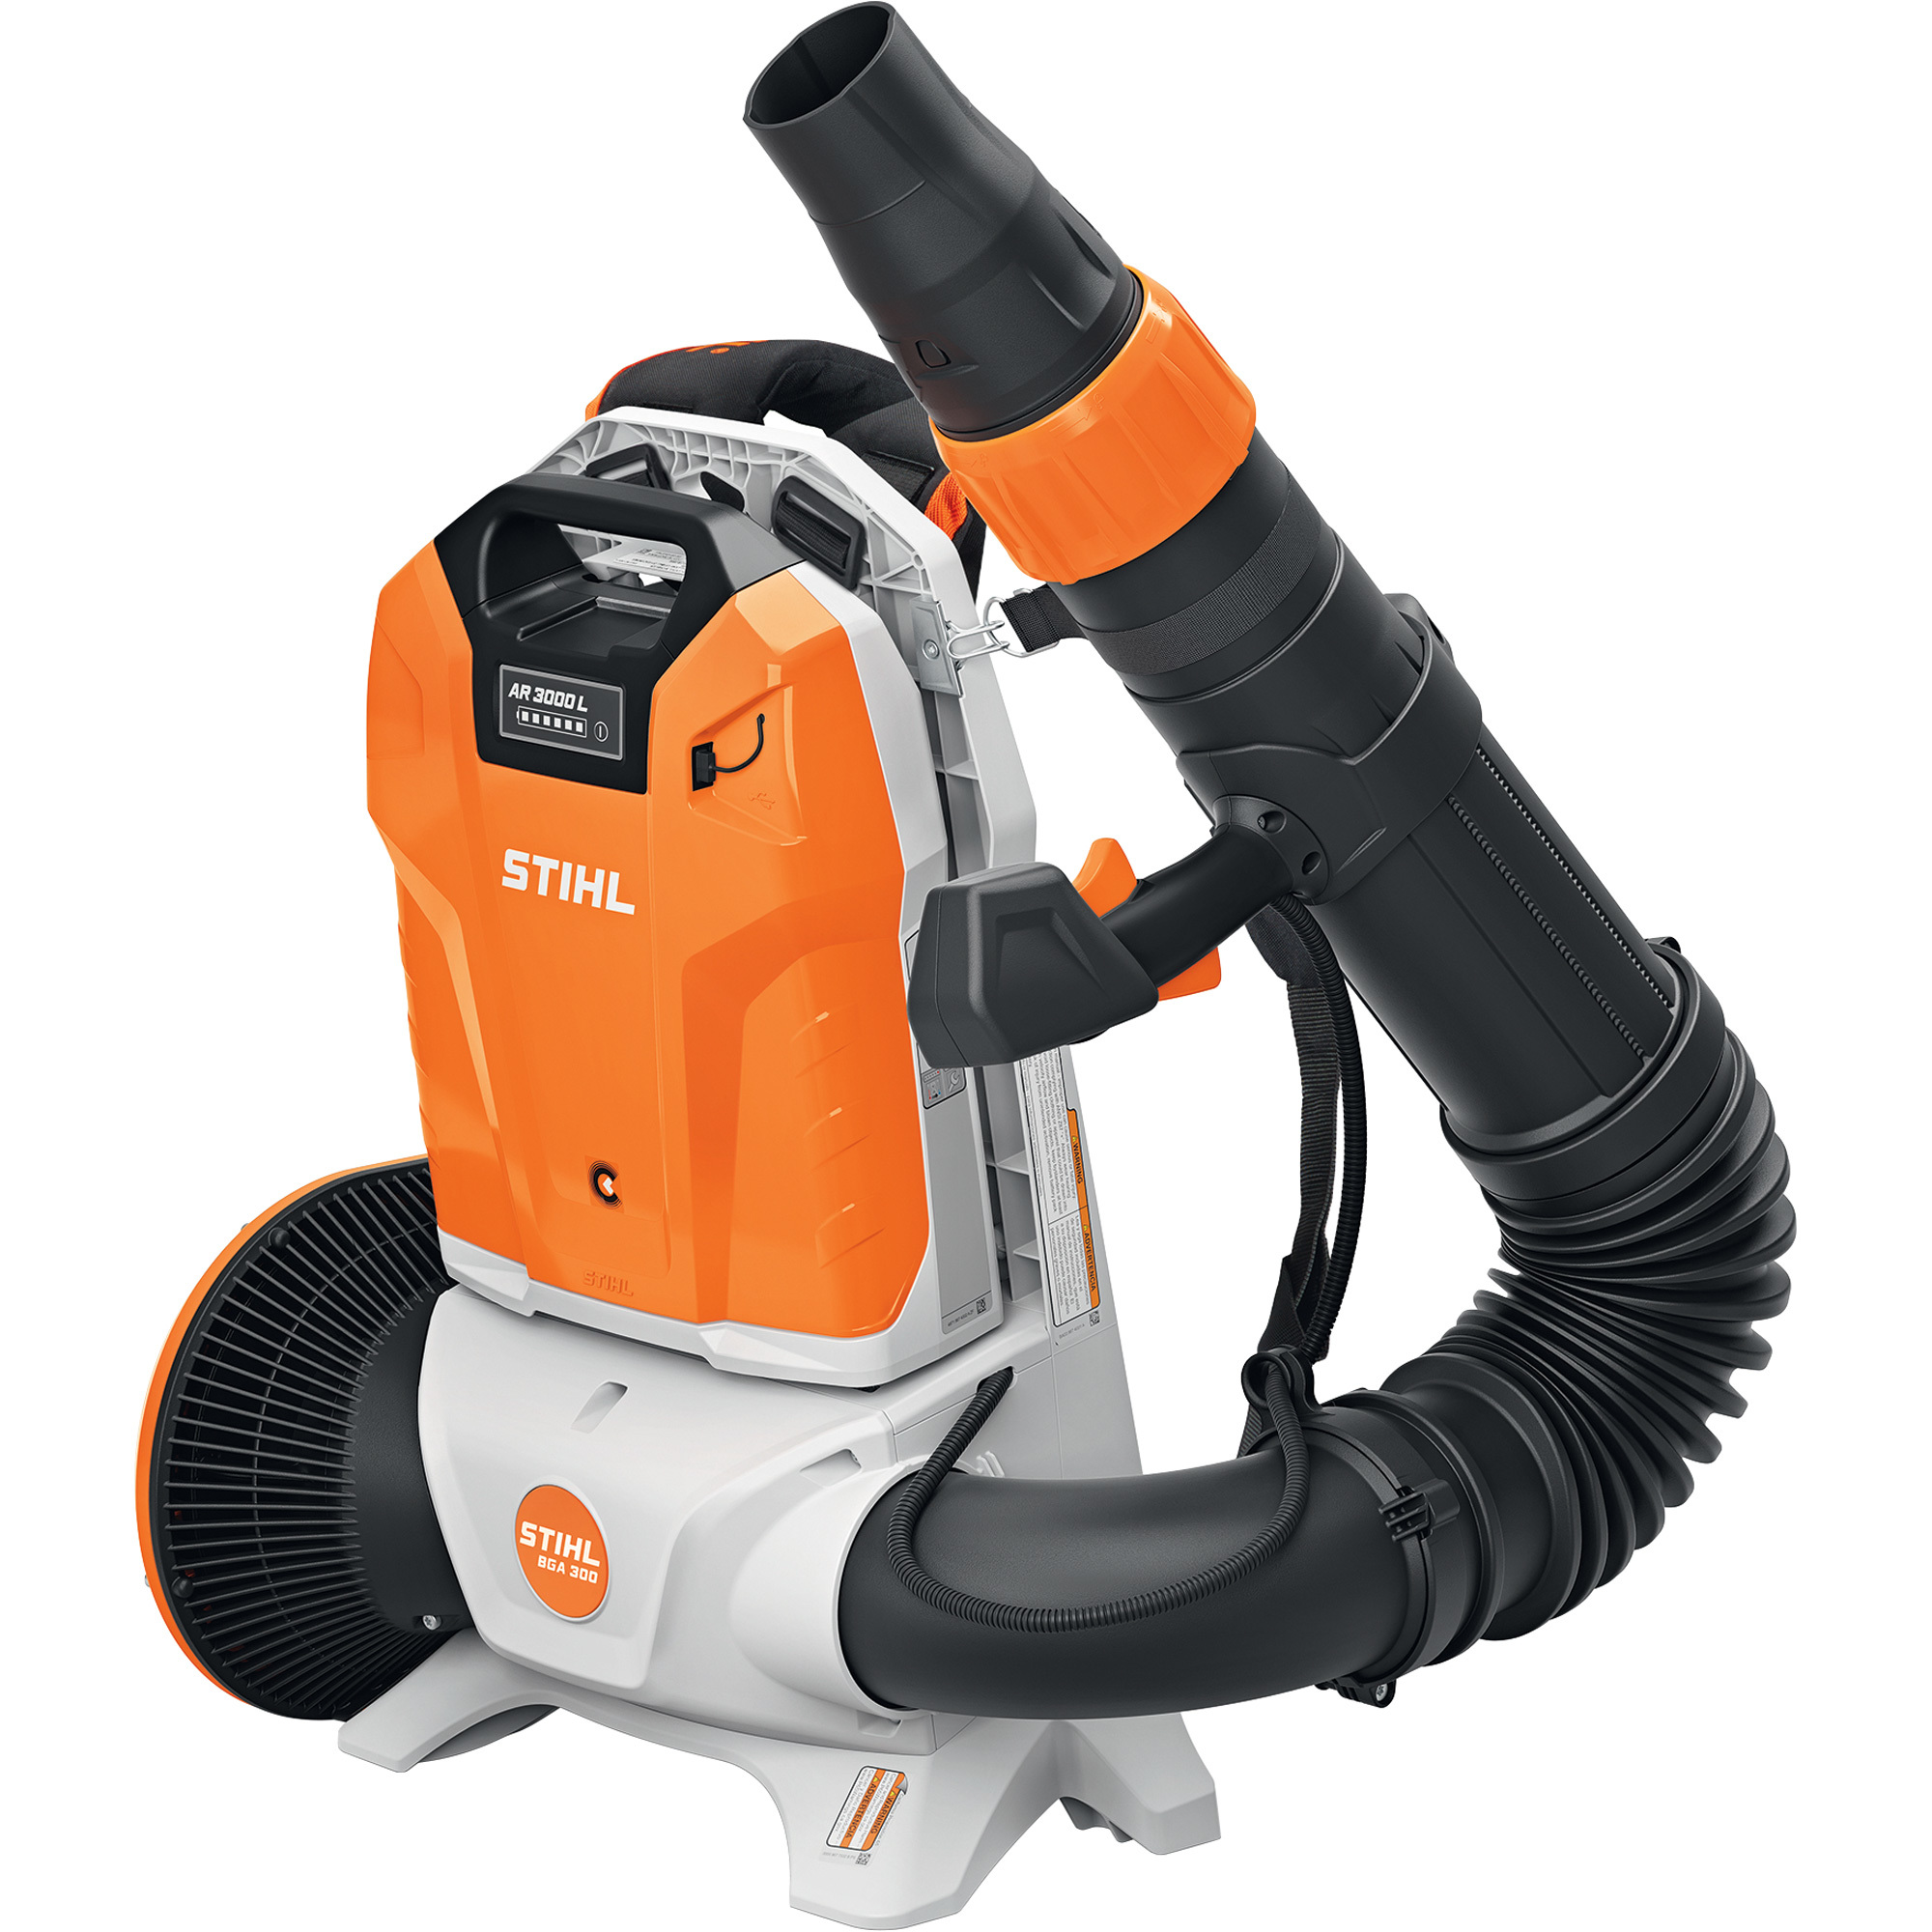 STIHL Battery-Operated Cordless Backpack Blower, Tool Only, 36 Volt, 192 MPH, 571 CFM, Model BGA 300